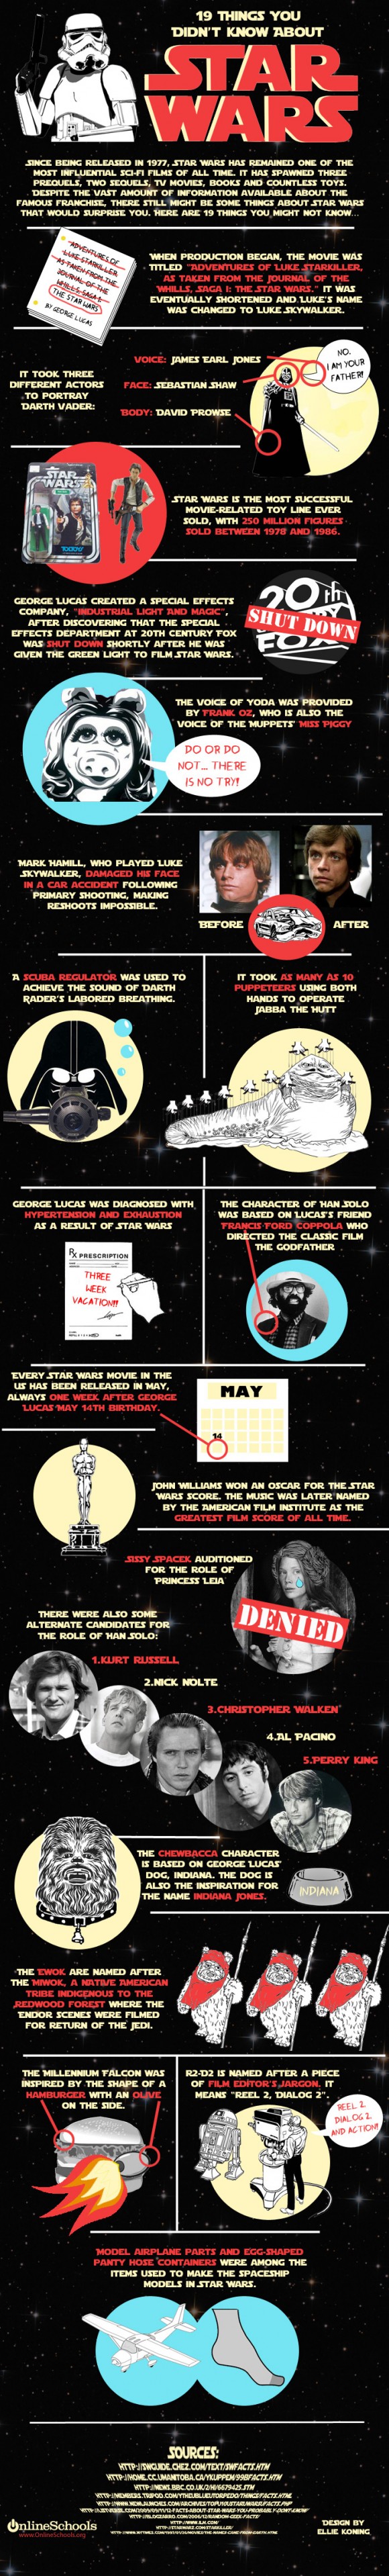 19 Things You Did'nt Know About Star Wars